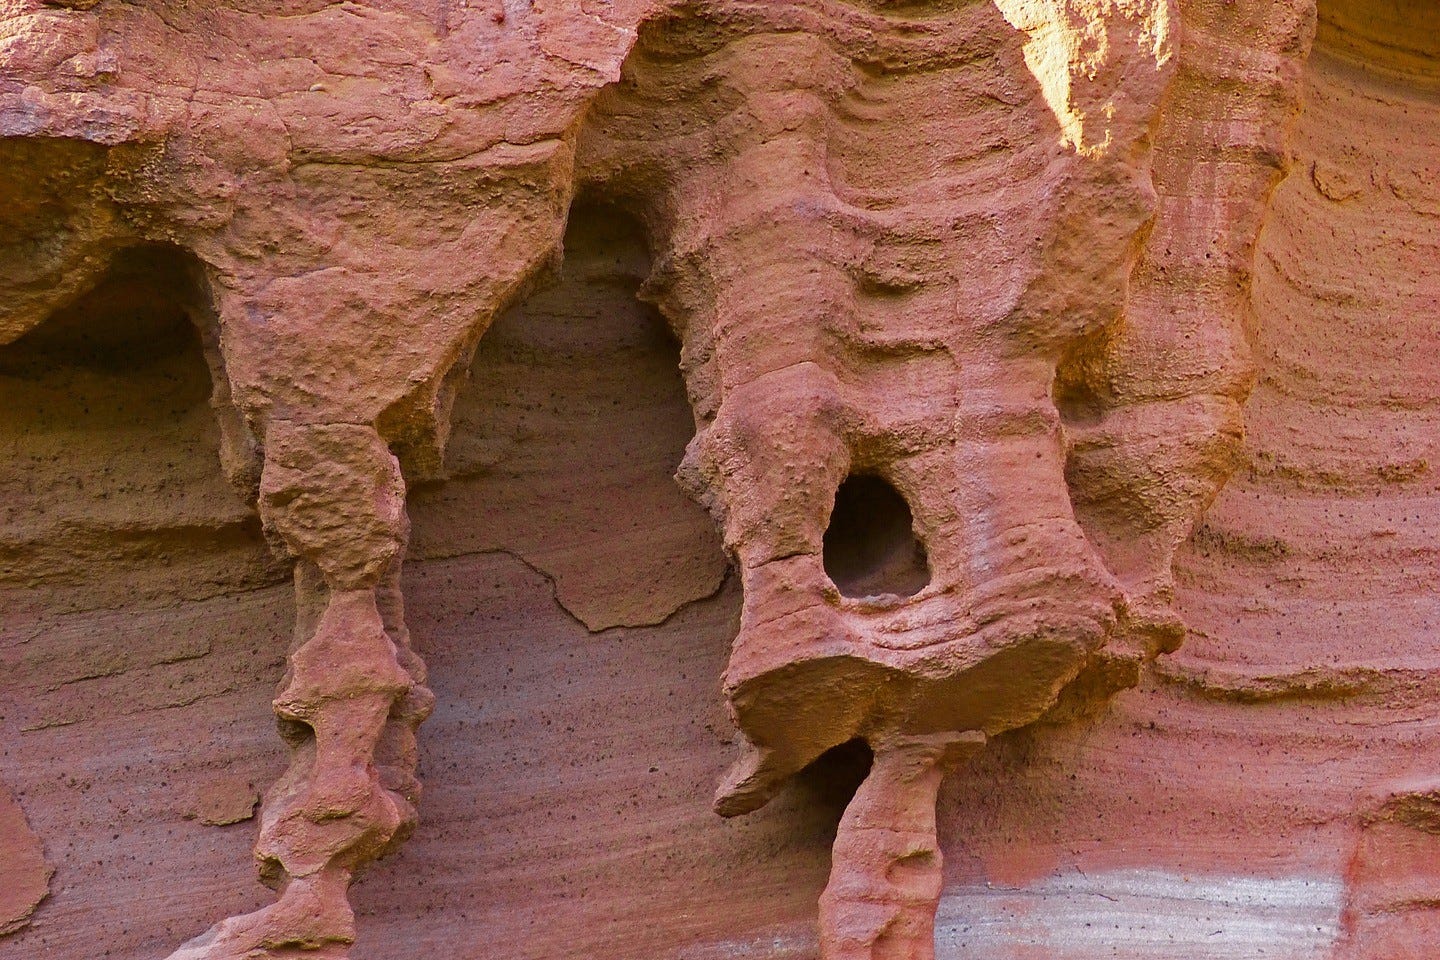 A rose colored rock formation formed by erosion